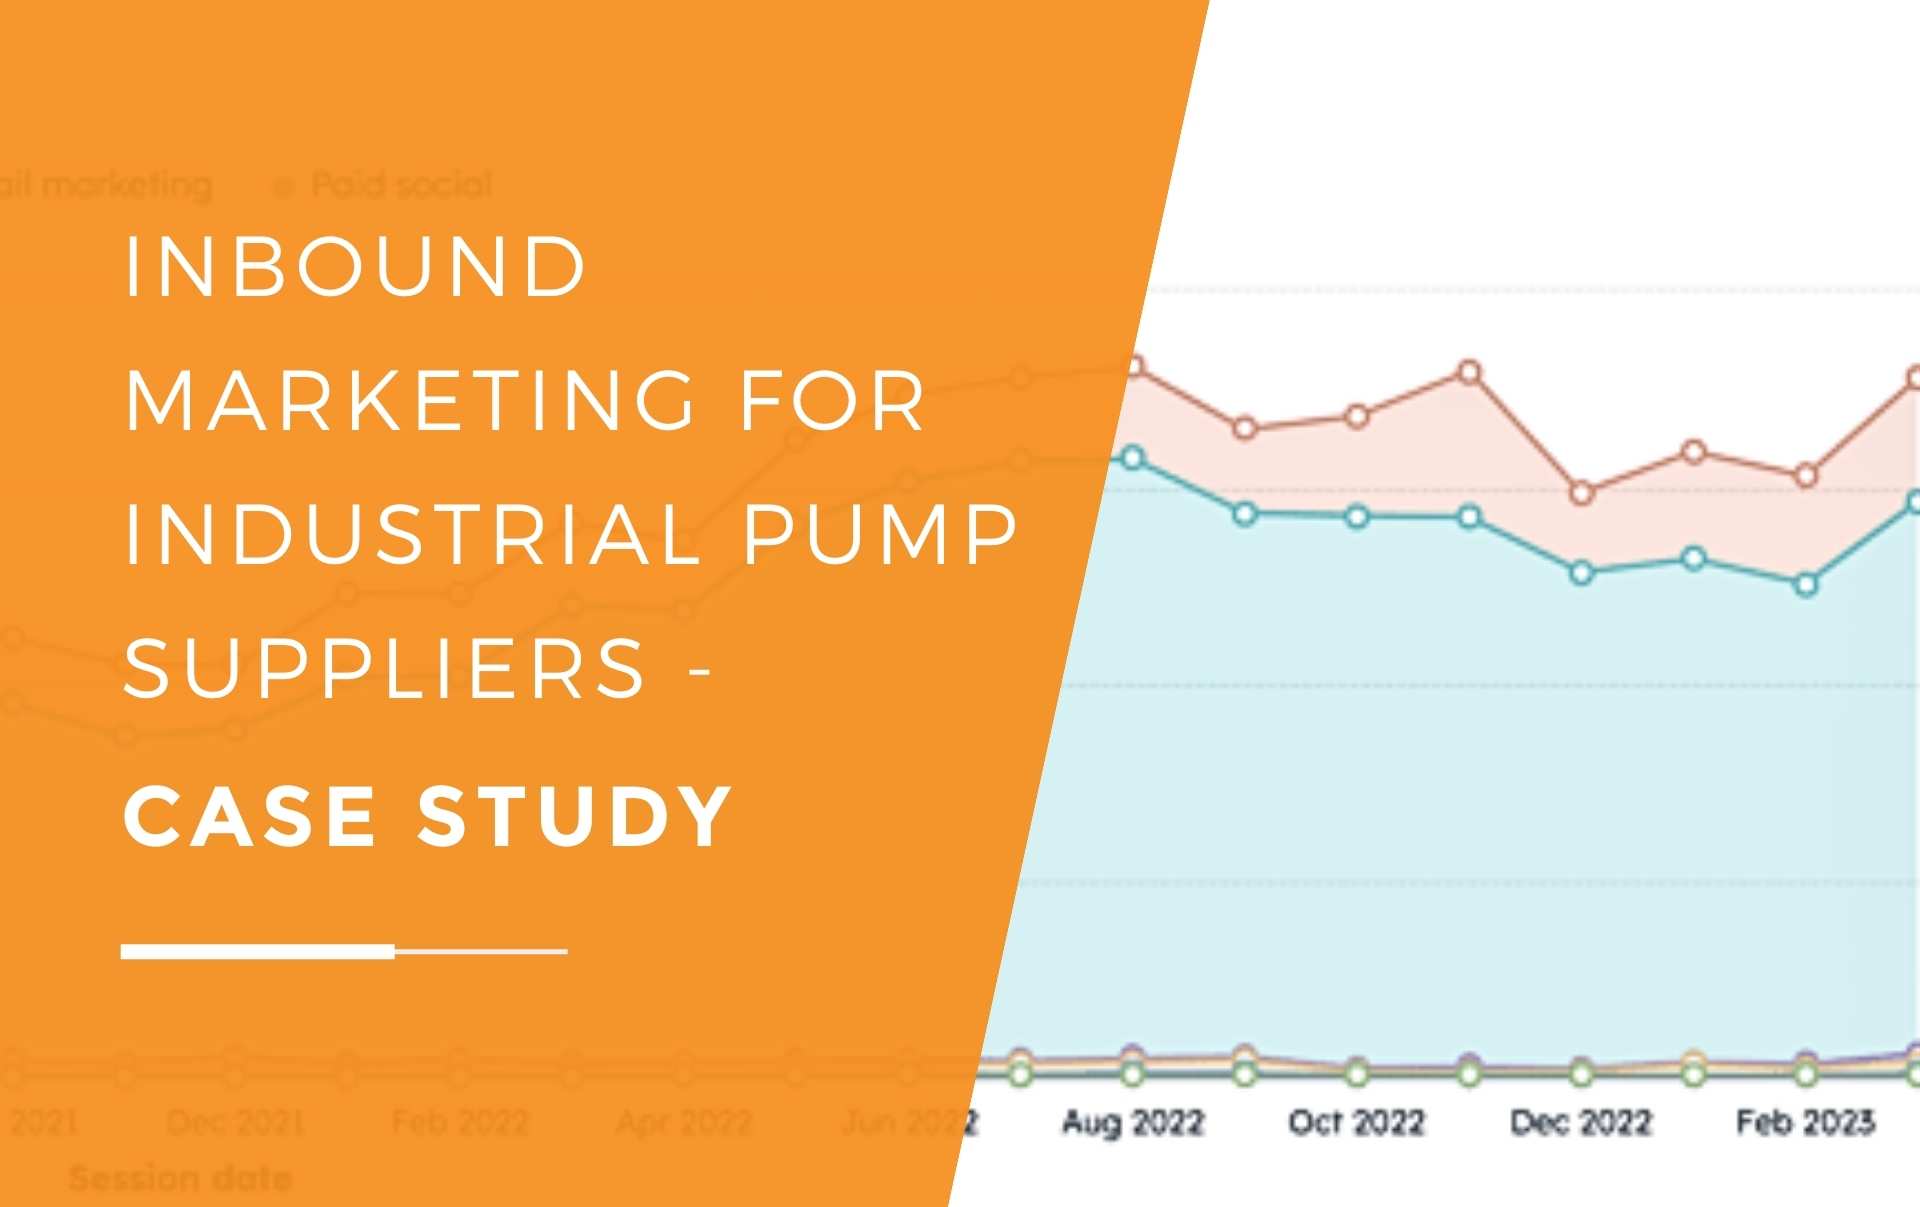 A line graph of inbound marketing traffic results dating from 2019-2023 for industrial pump suppliers after working with JDR Group